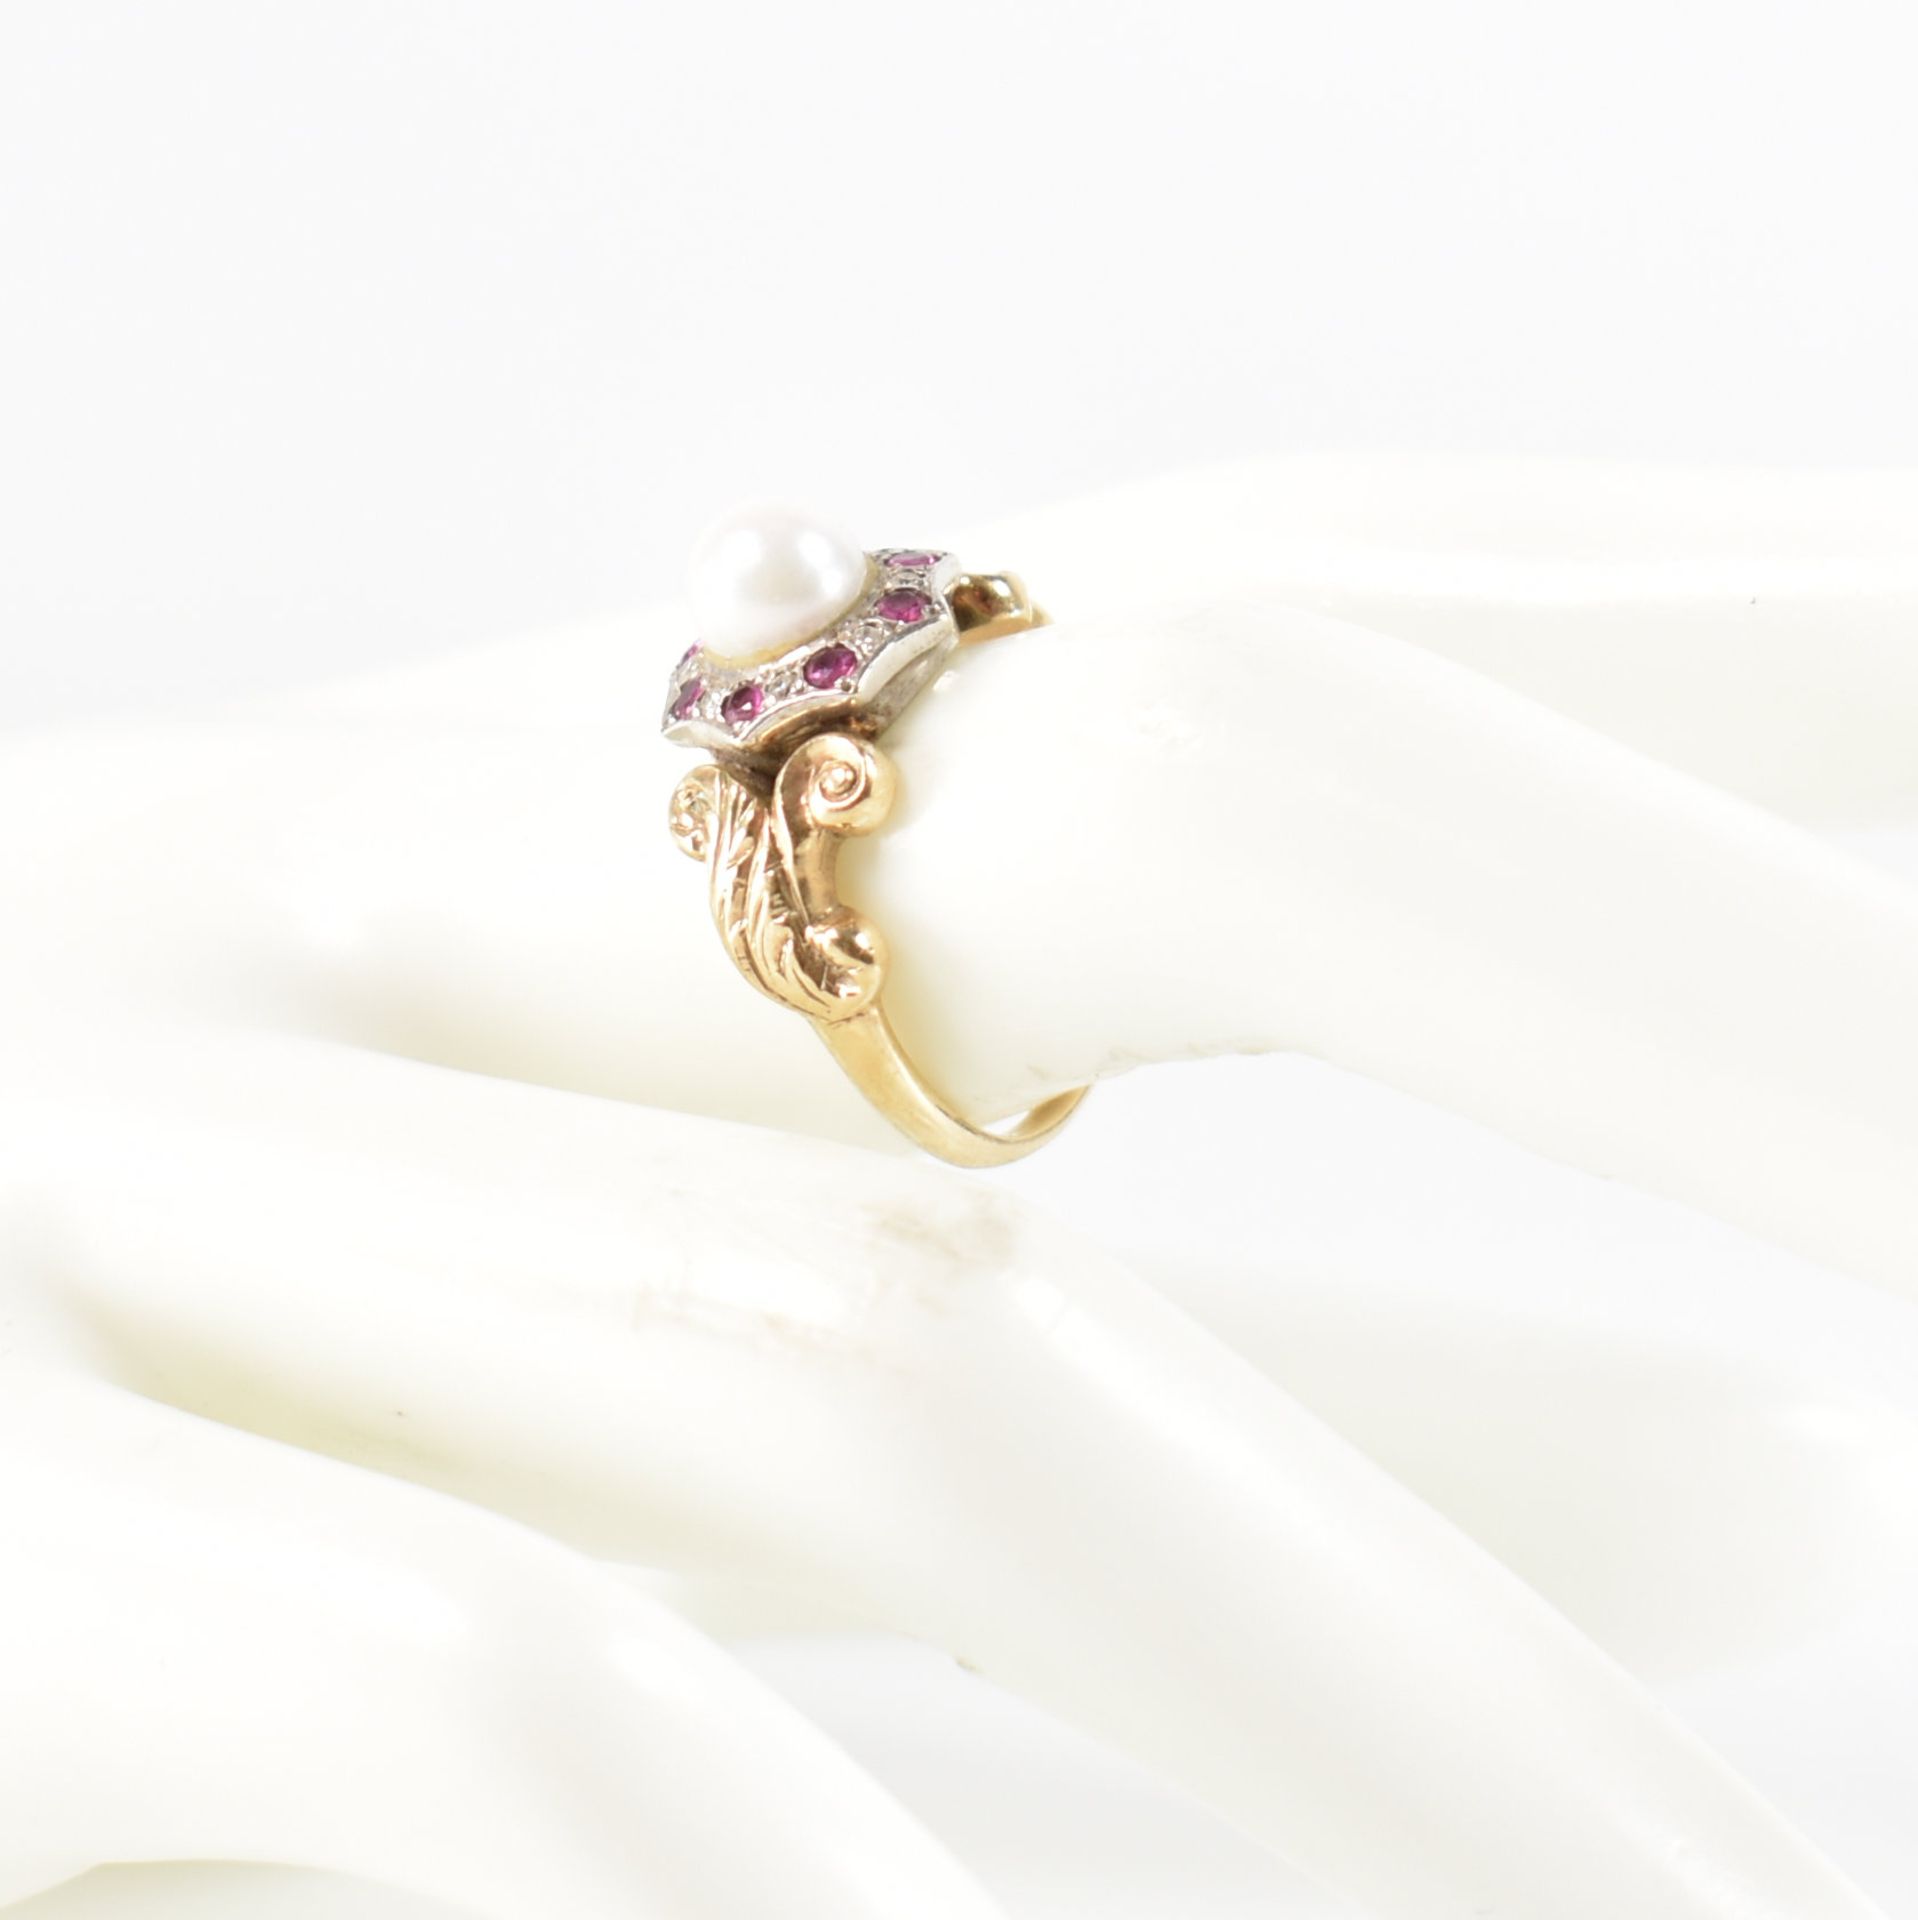 HALLMARKED 9CT GOLD PEARL RUBY & DIAMOND RING - Image 8 of 8